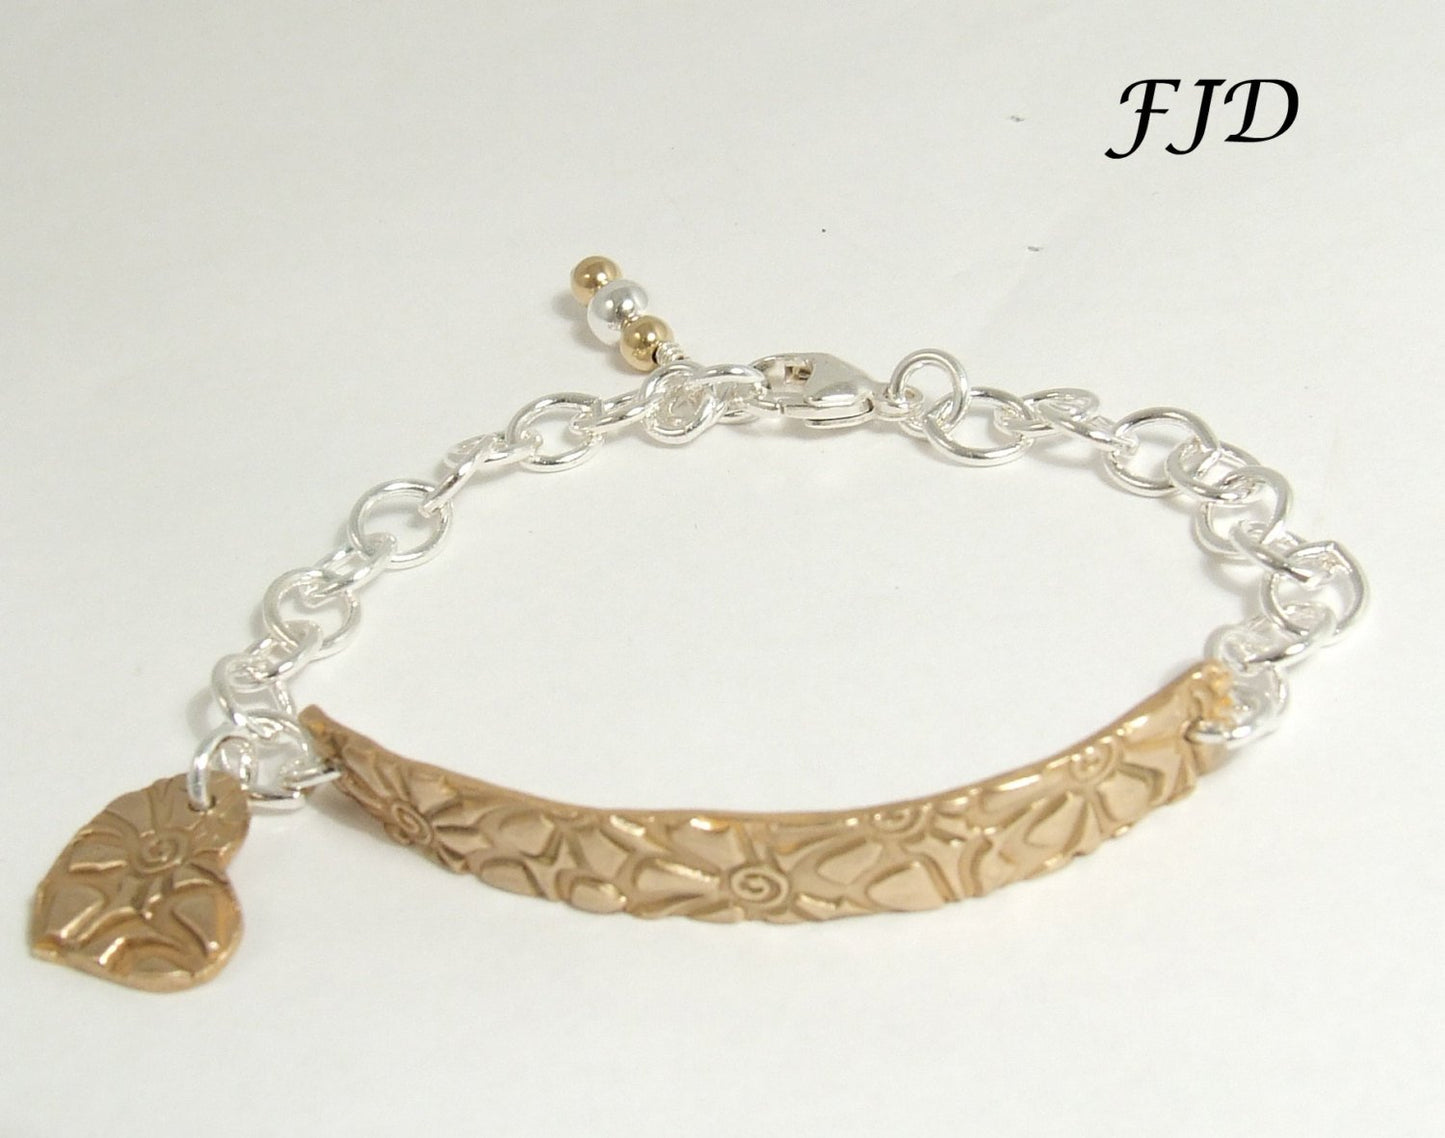 Hand Stamped Bronze and Sterling Silver Bracelet